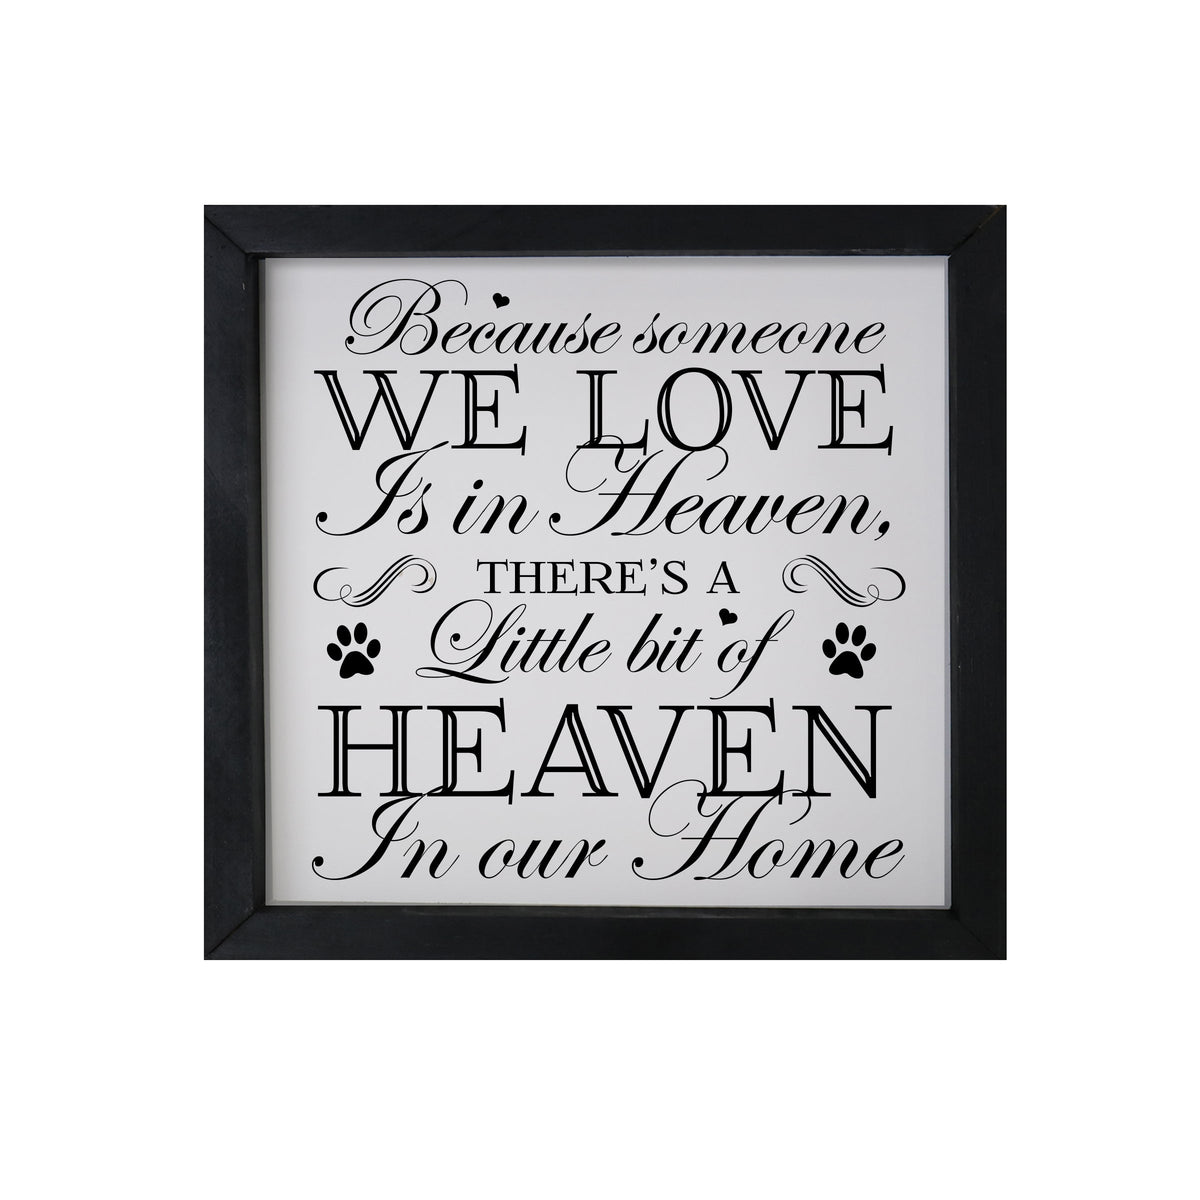 11.5x11.5 Black Framed Pet Memorial Shadow Box with phrase &quot;Because Someone We Love&quot;